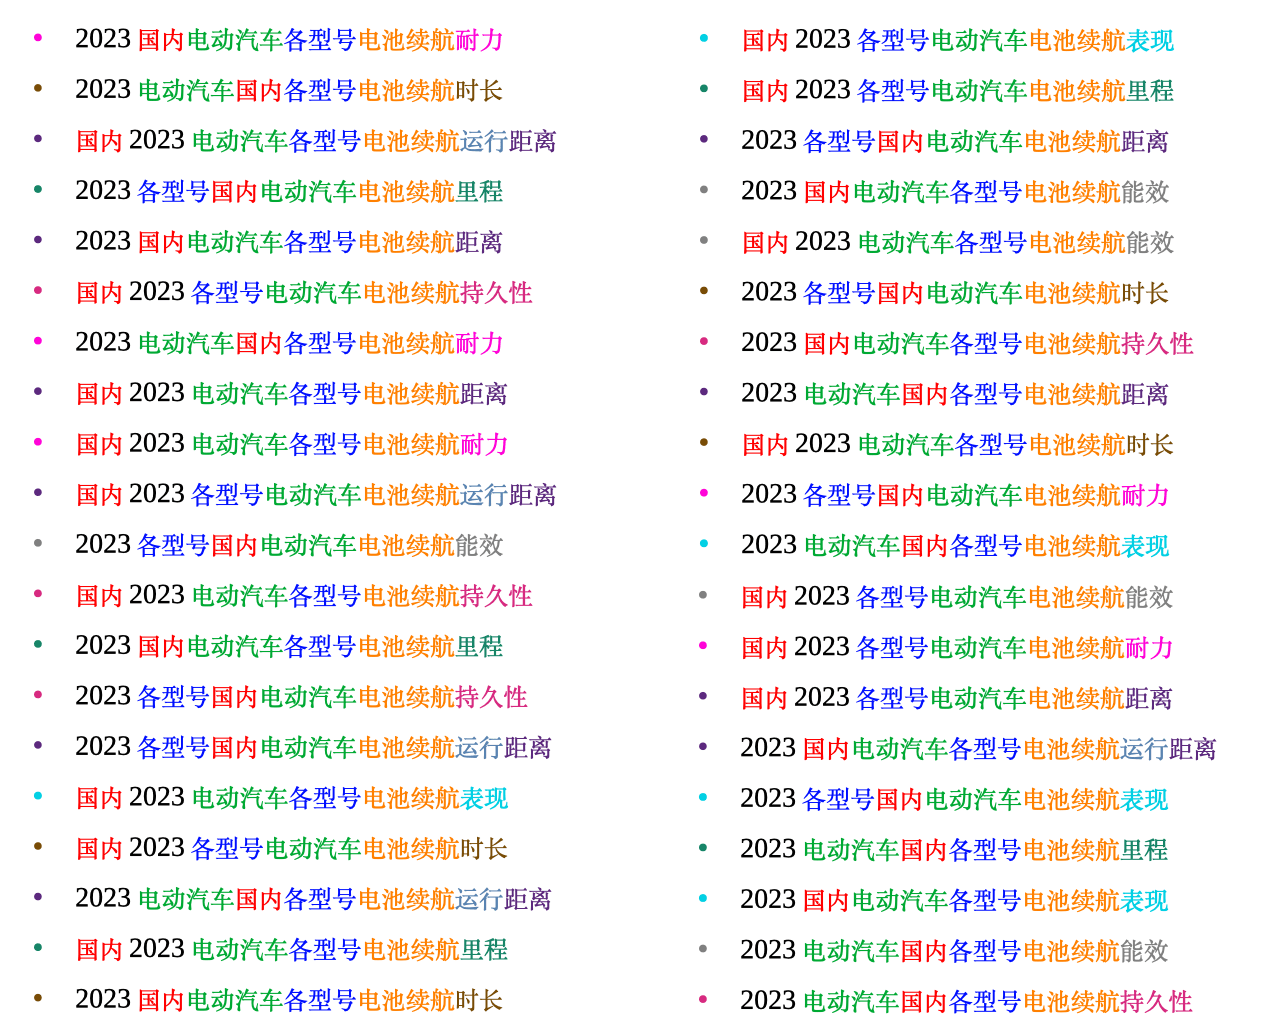 Vast number of longtail keywords with similar meaning share similar bigrams and trigrams - chunks of Chinese Characters in a row.